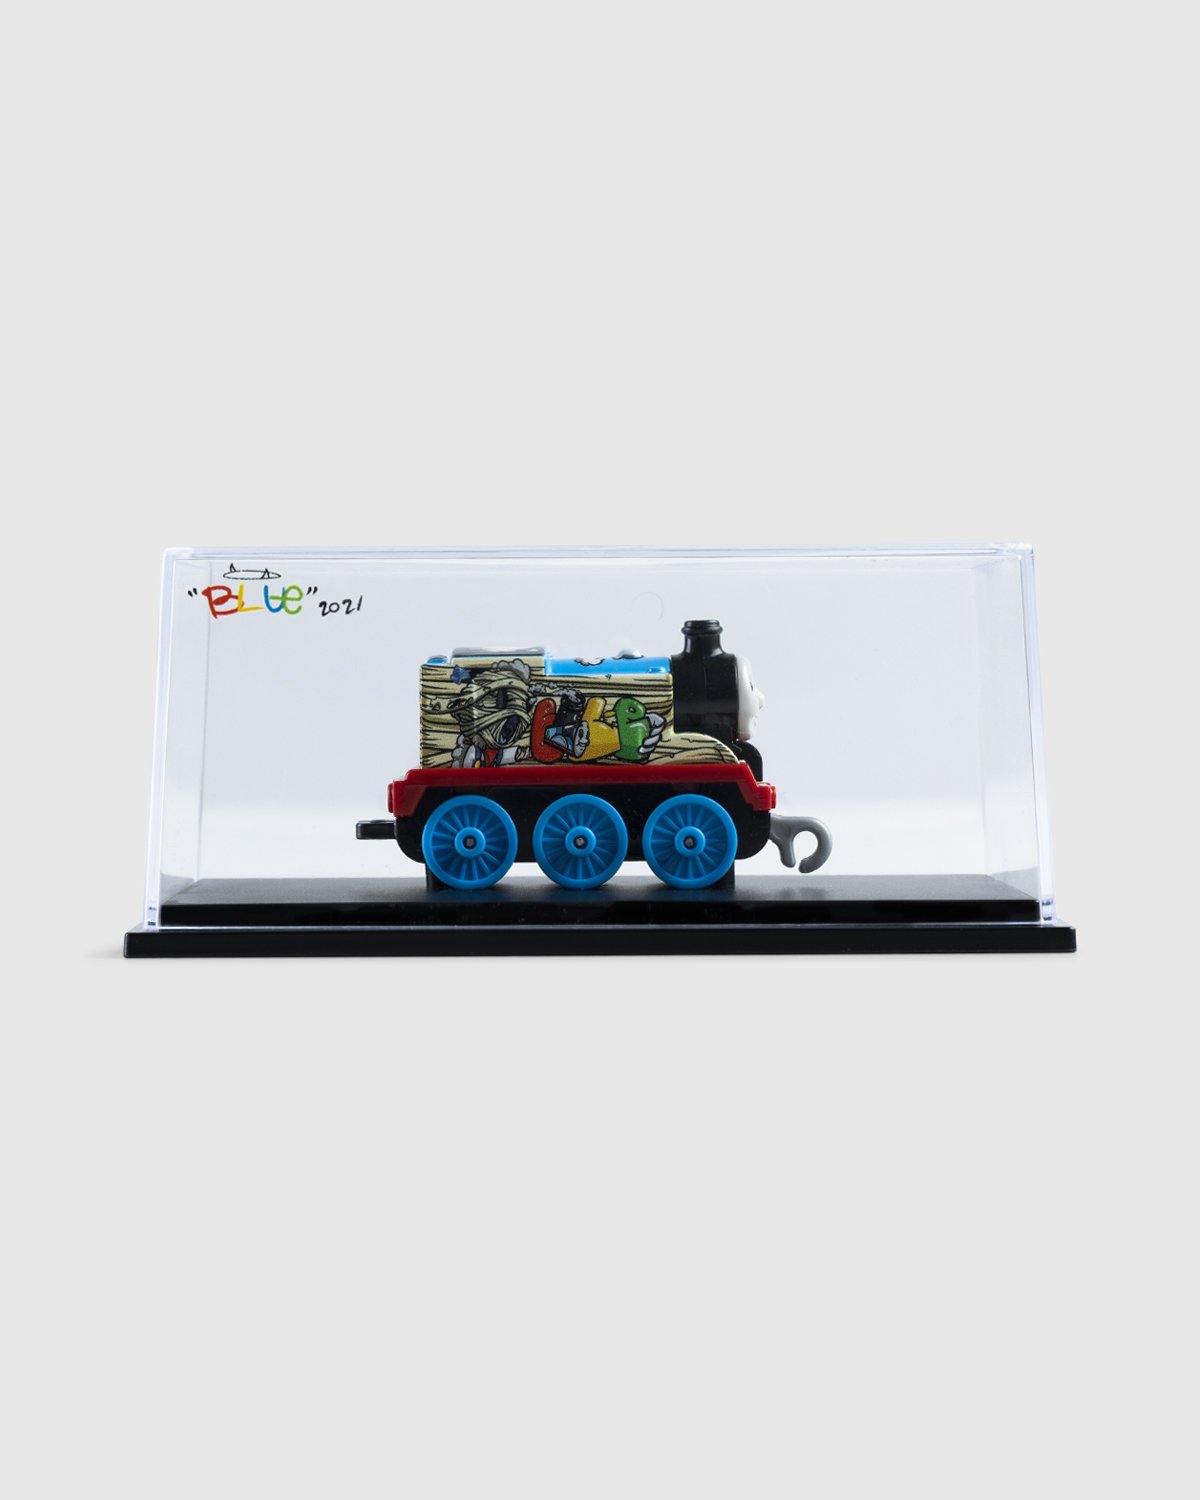 Mattel Creations x Blue the Great – Thomas the Tank Engine Diecast